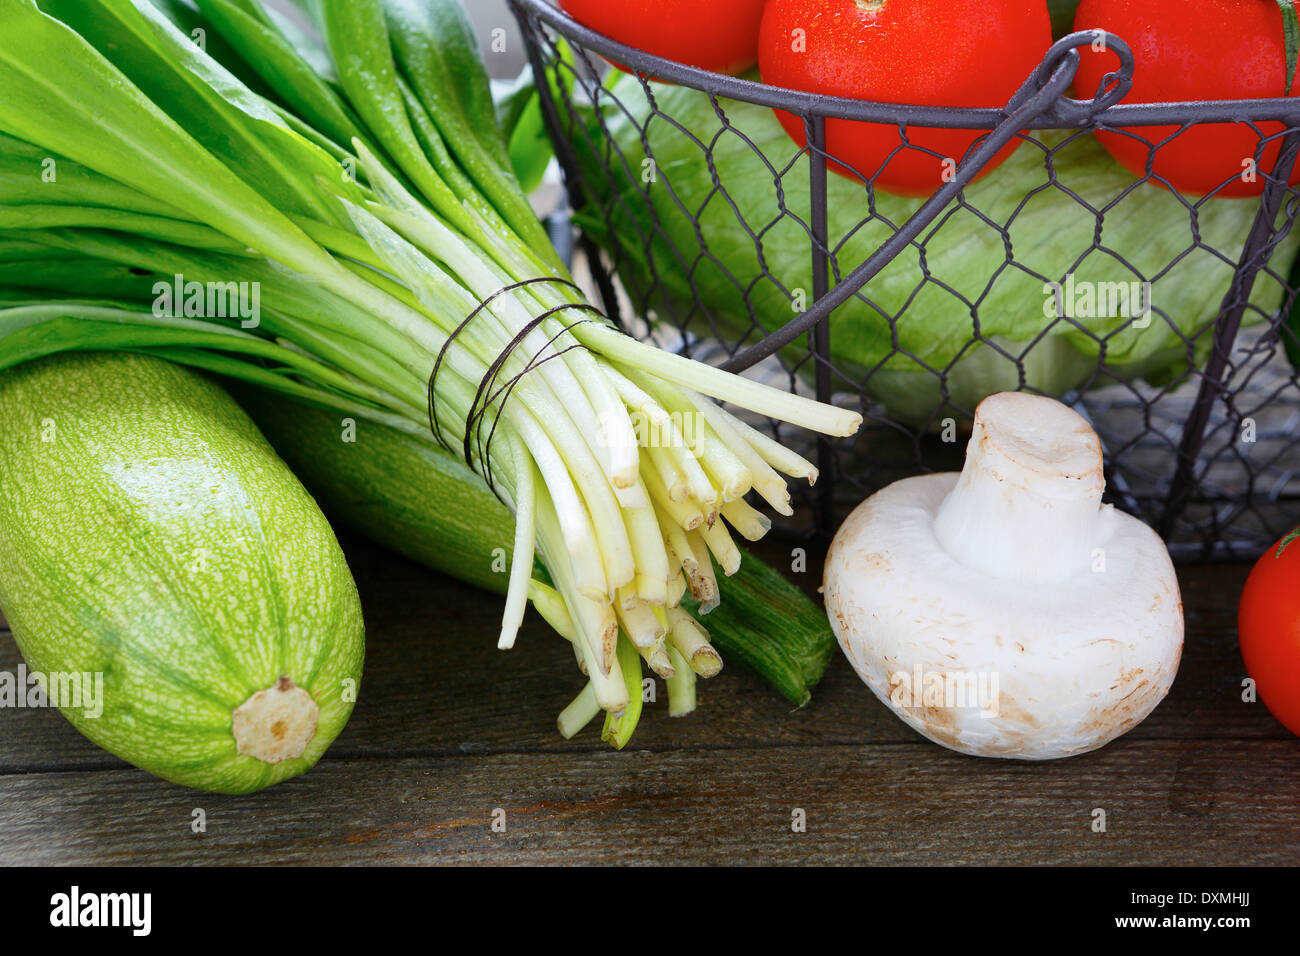 fresh vegetables on the table and in basket Stock Photo